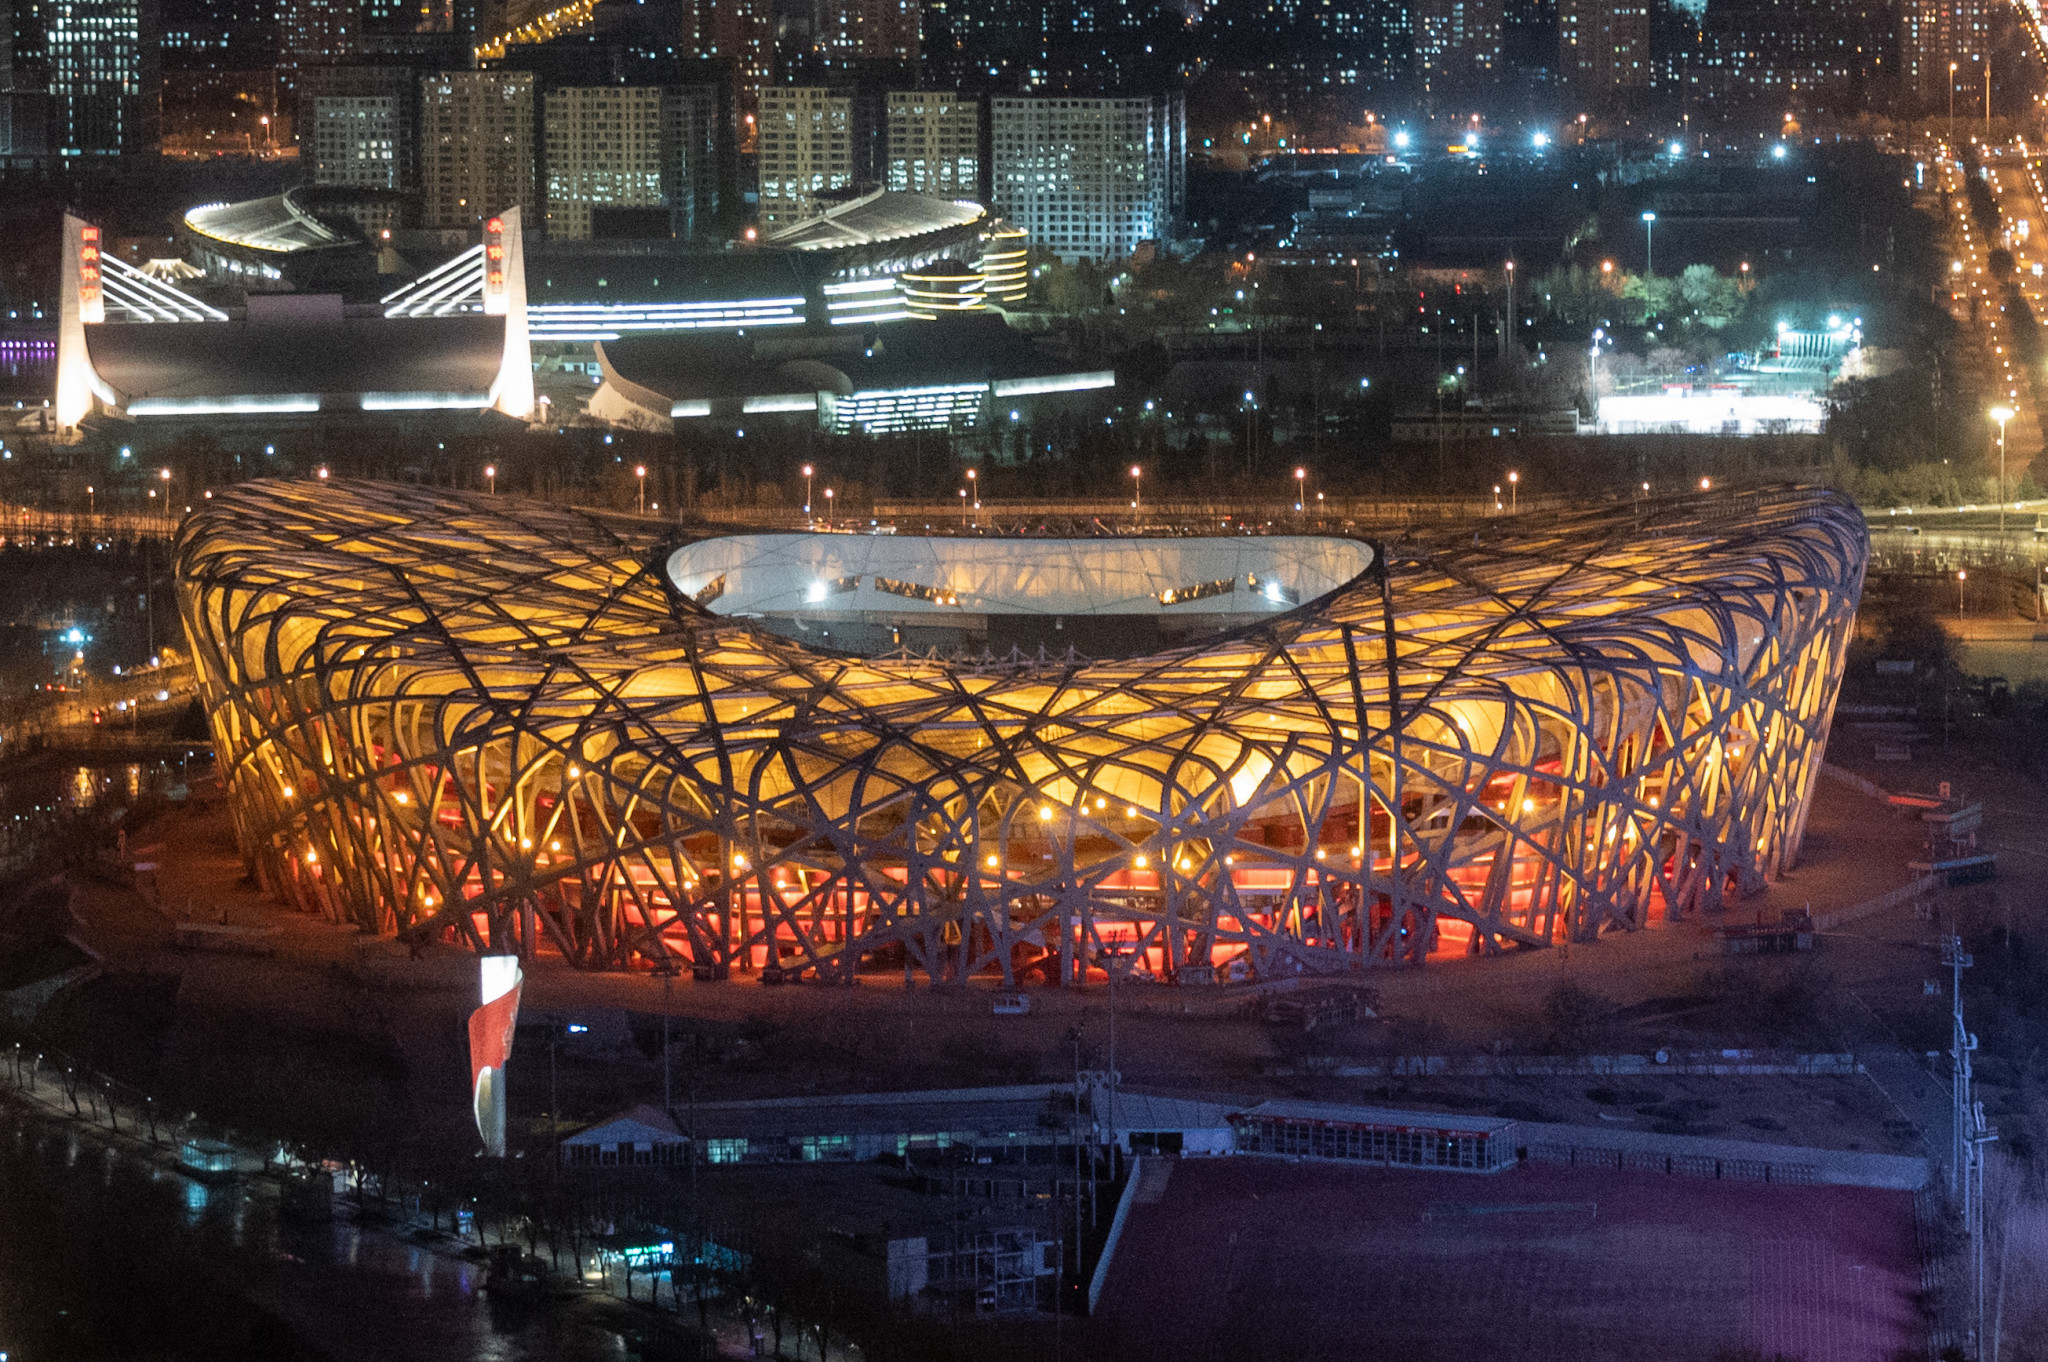 The Beijing National Stadium is set to host the Winter Olympic Games Opening Ceremony on February 4 ©Getty Images